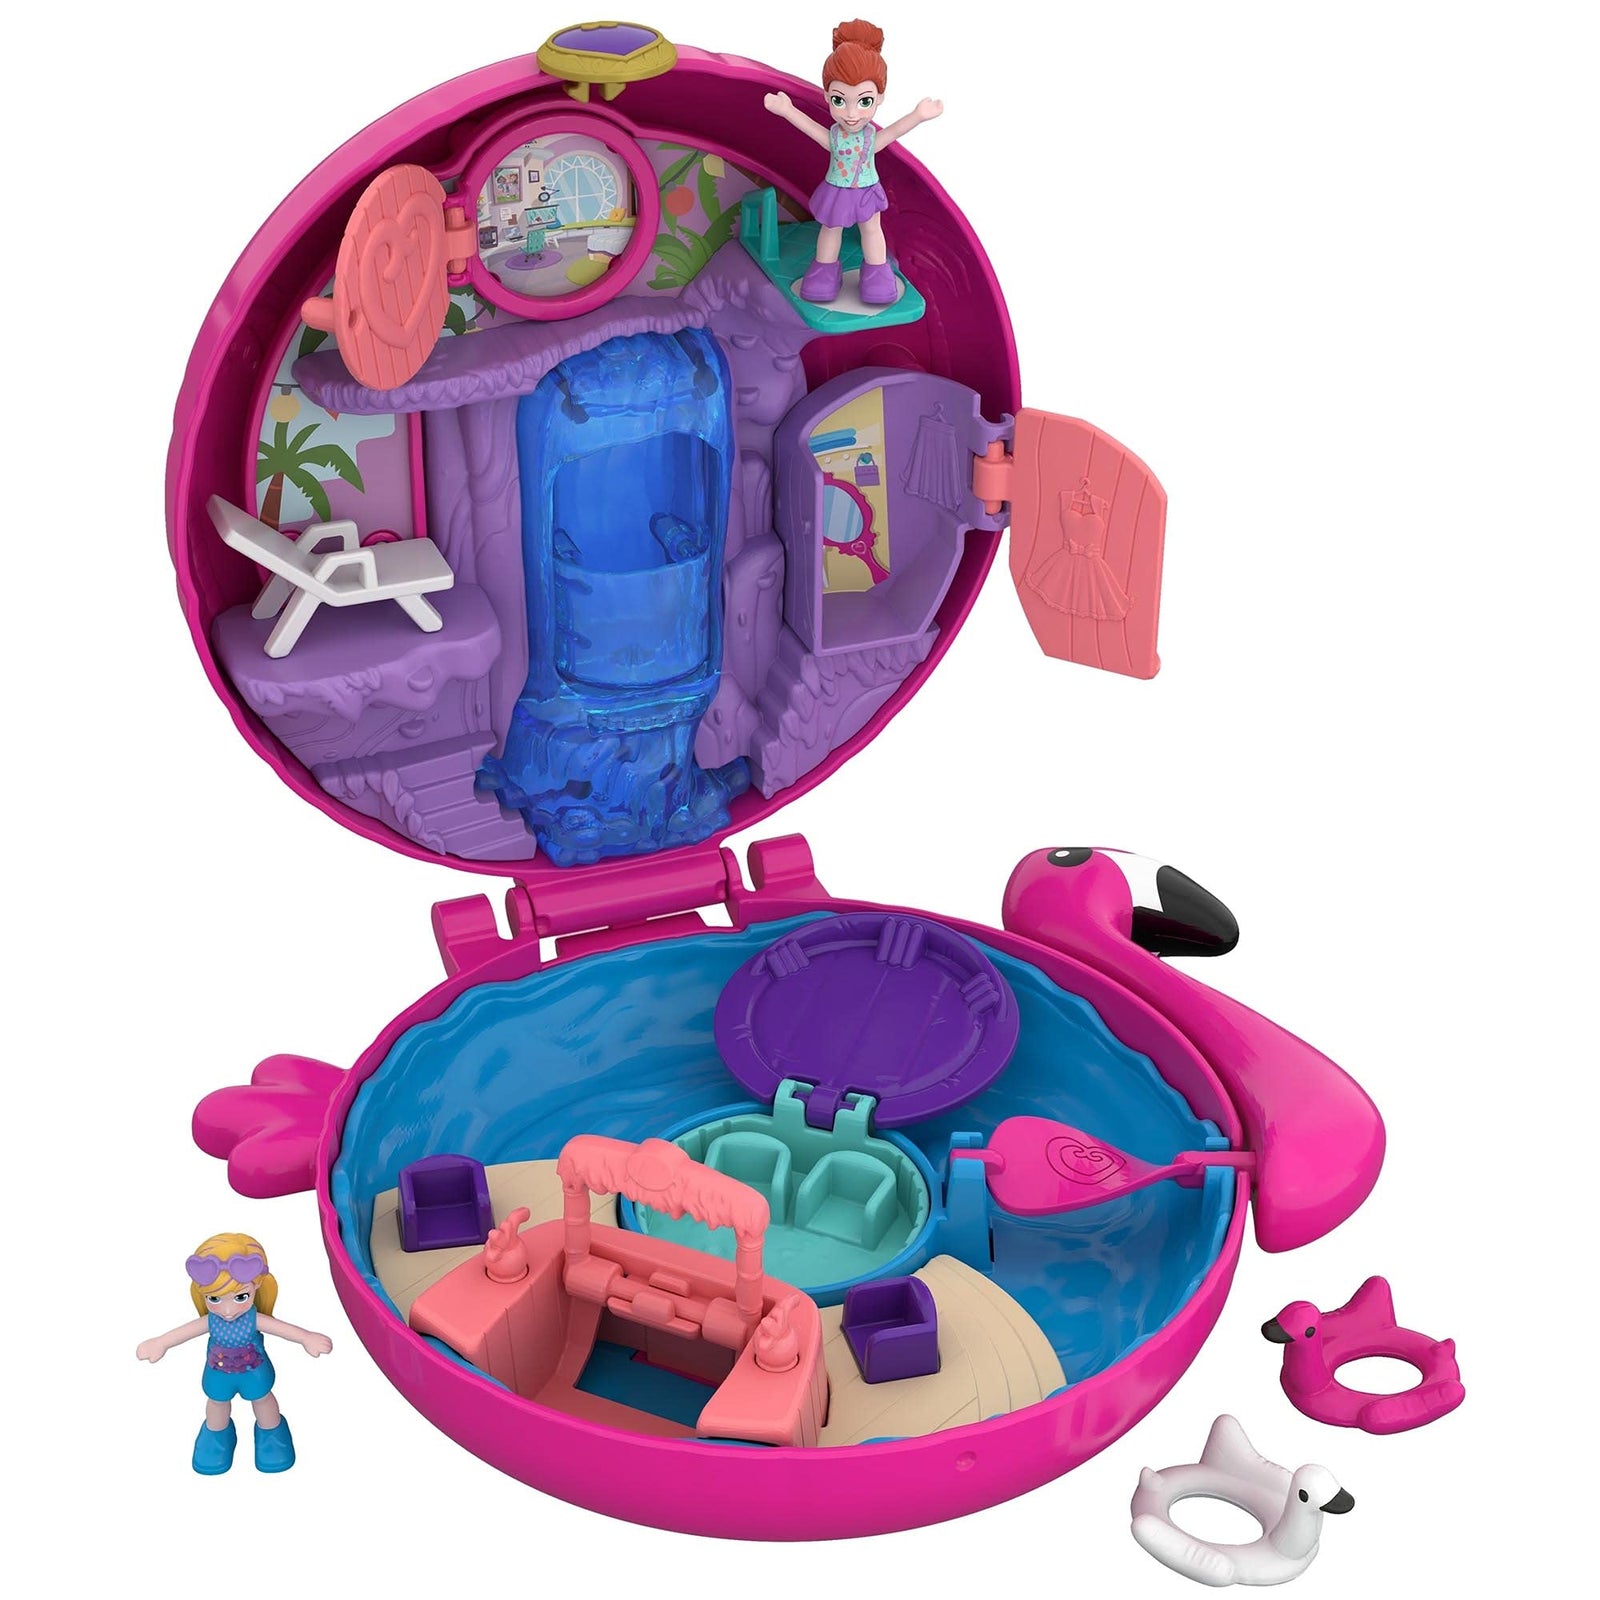 Polly Pocket Pocket World Flamingo Floatie Compact with Surprise Reveals, Micro Dolls & Accessories [Amazon Exclusive]